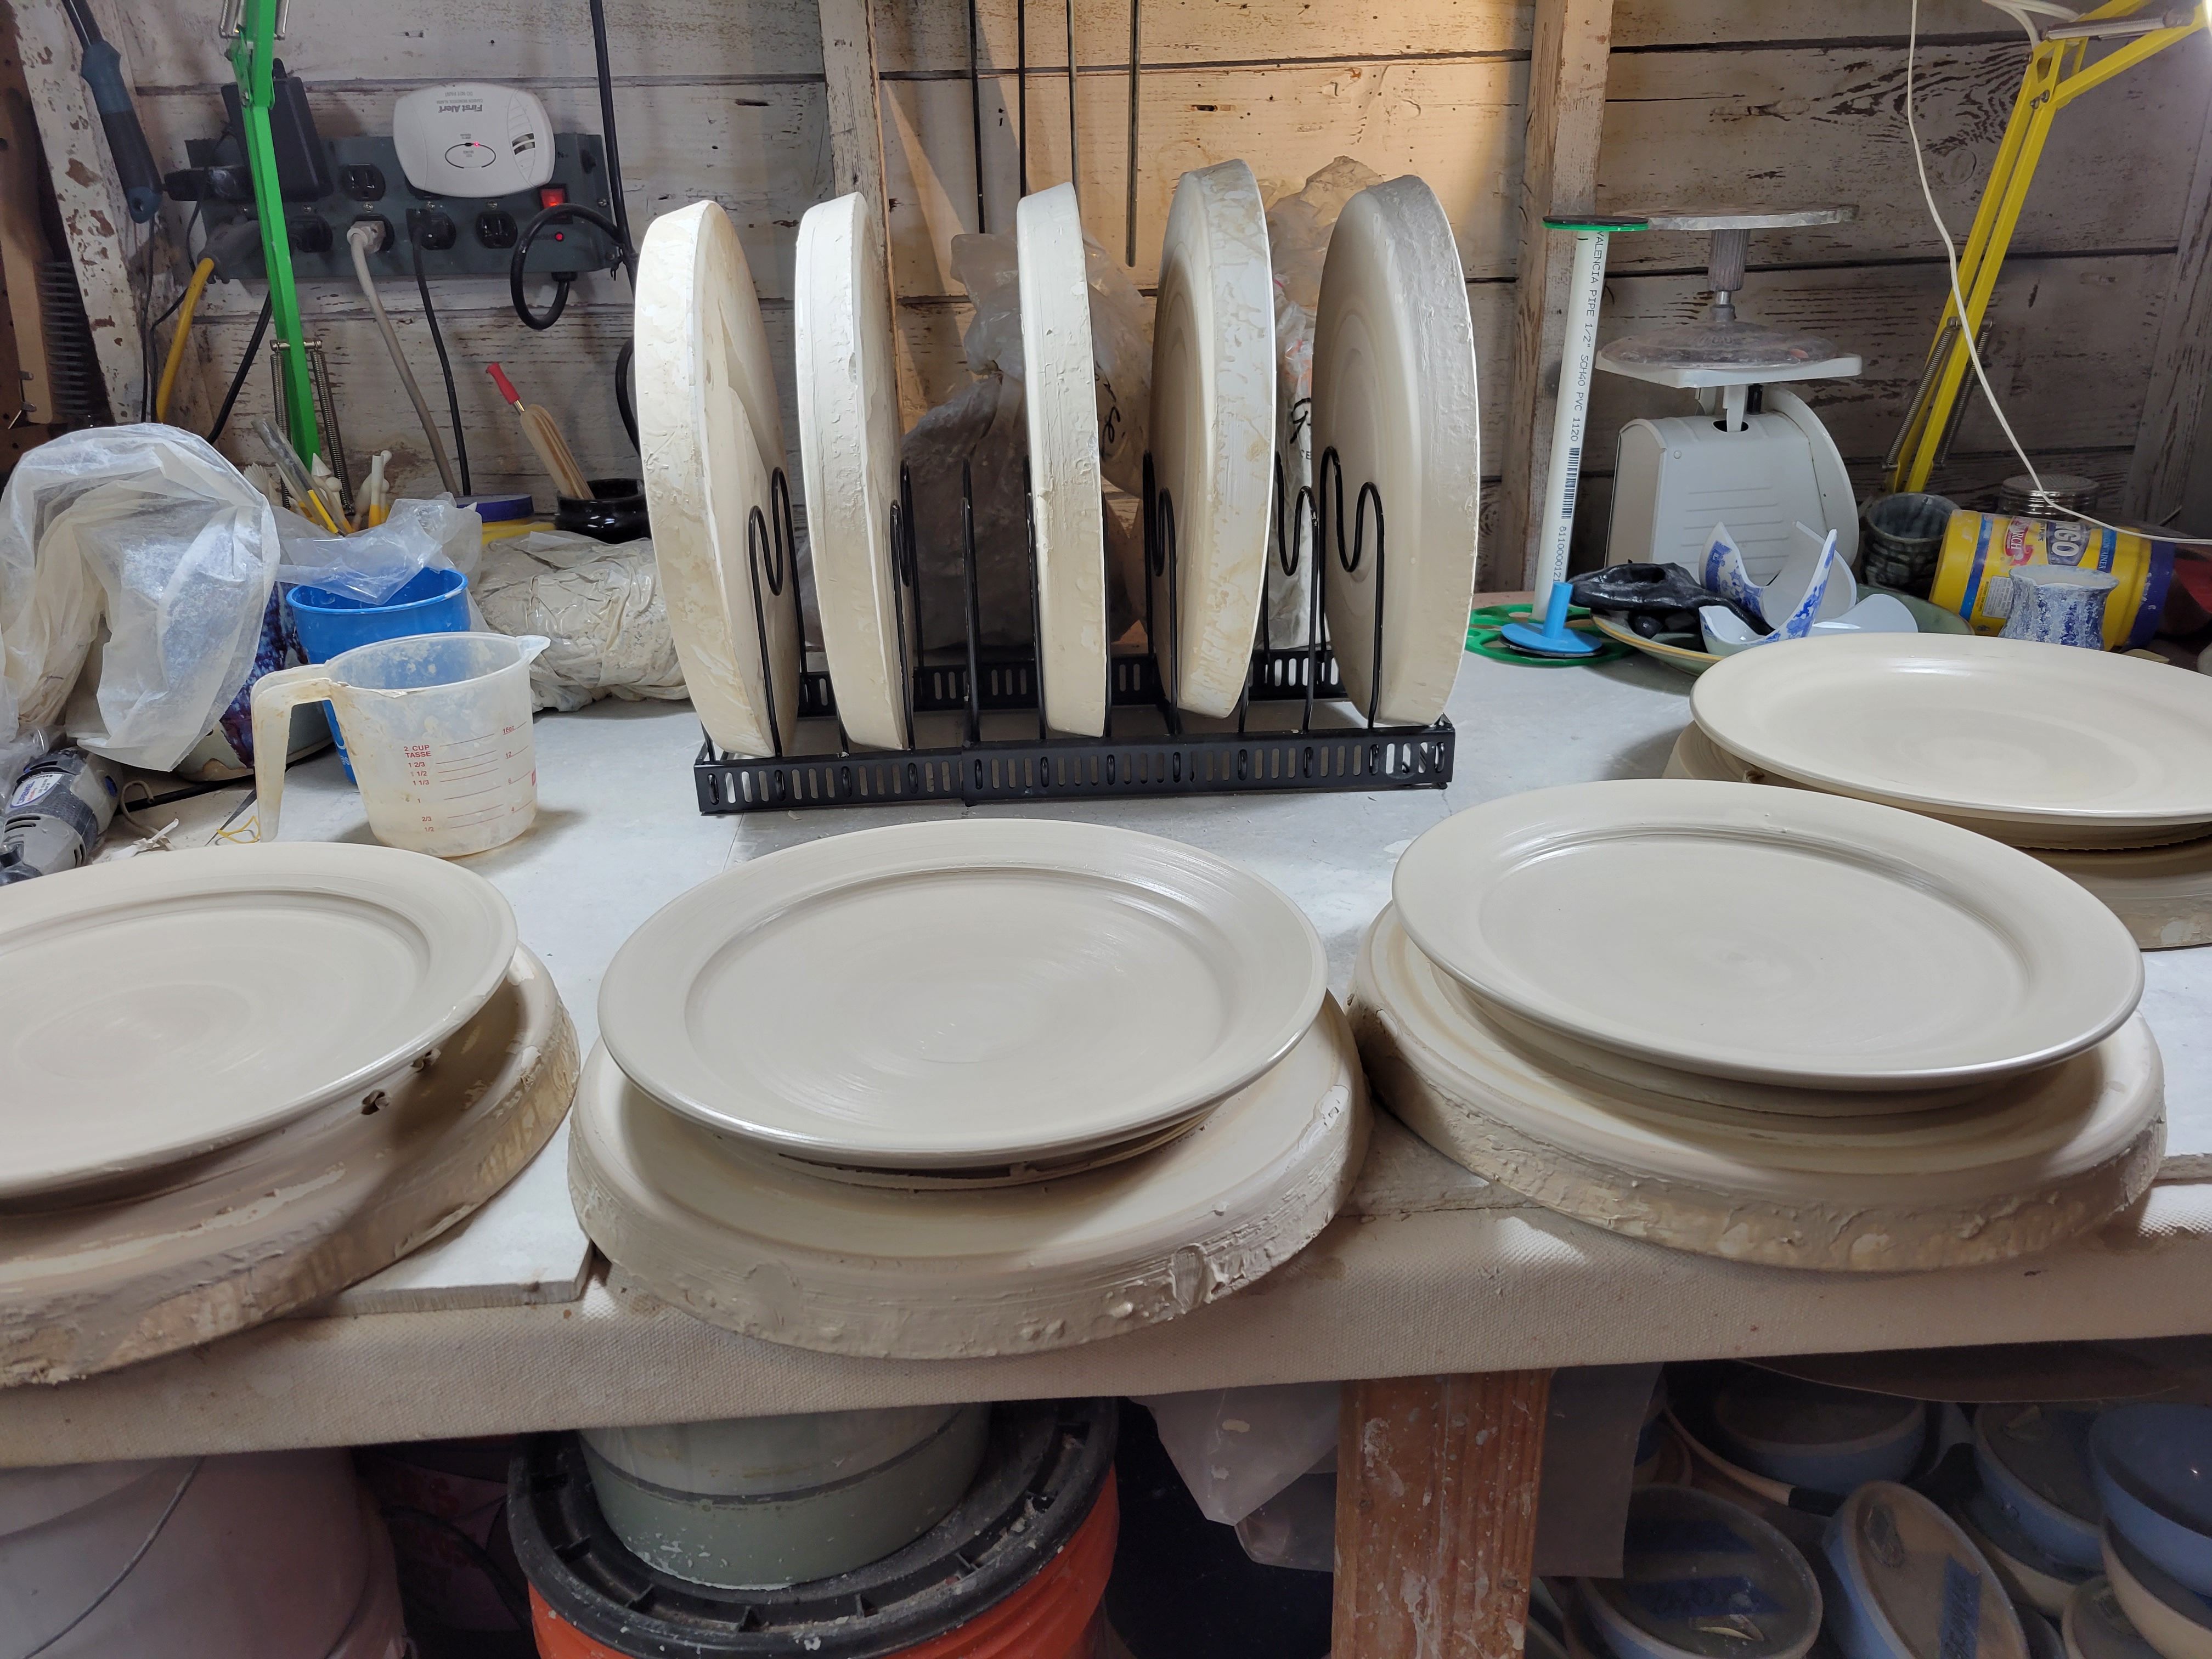 my studio worktable, holding four plates drying on plaster bats.  in the background are five more plaster bats in a metal rack, plus various tools